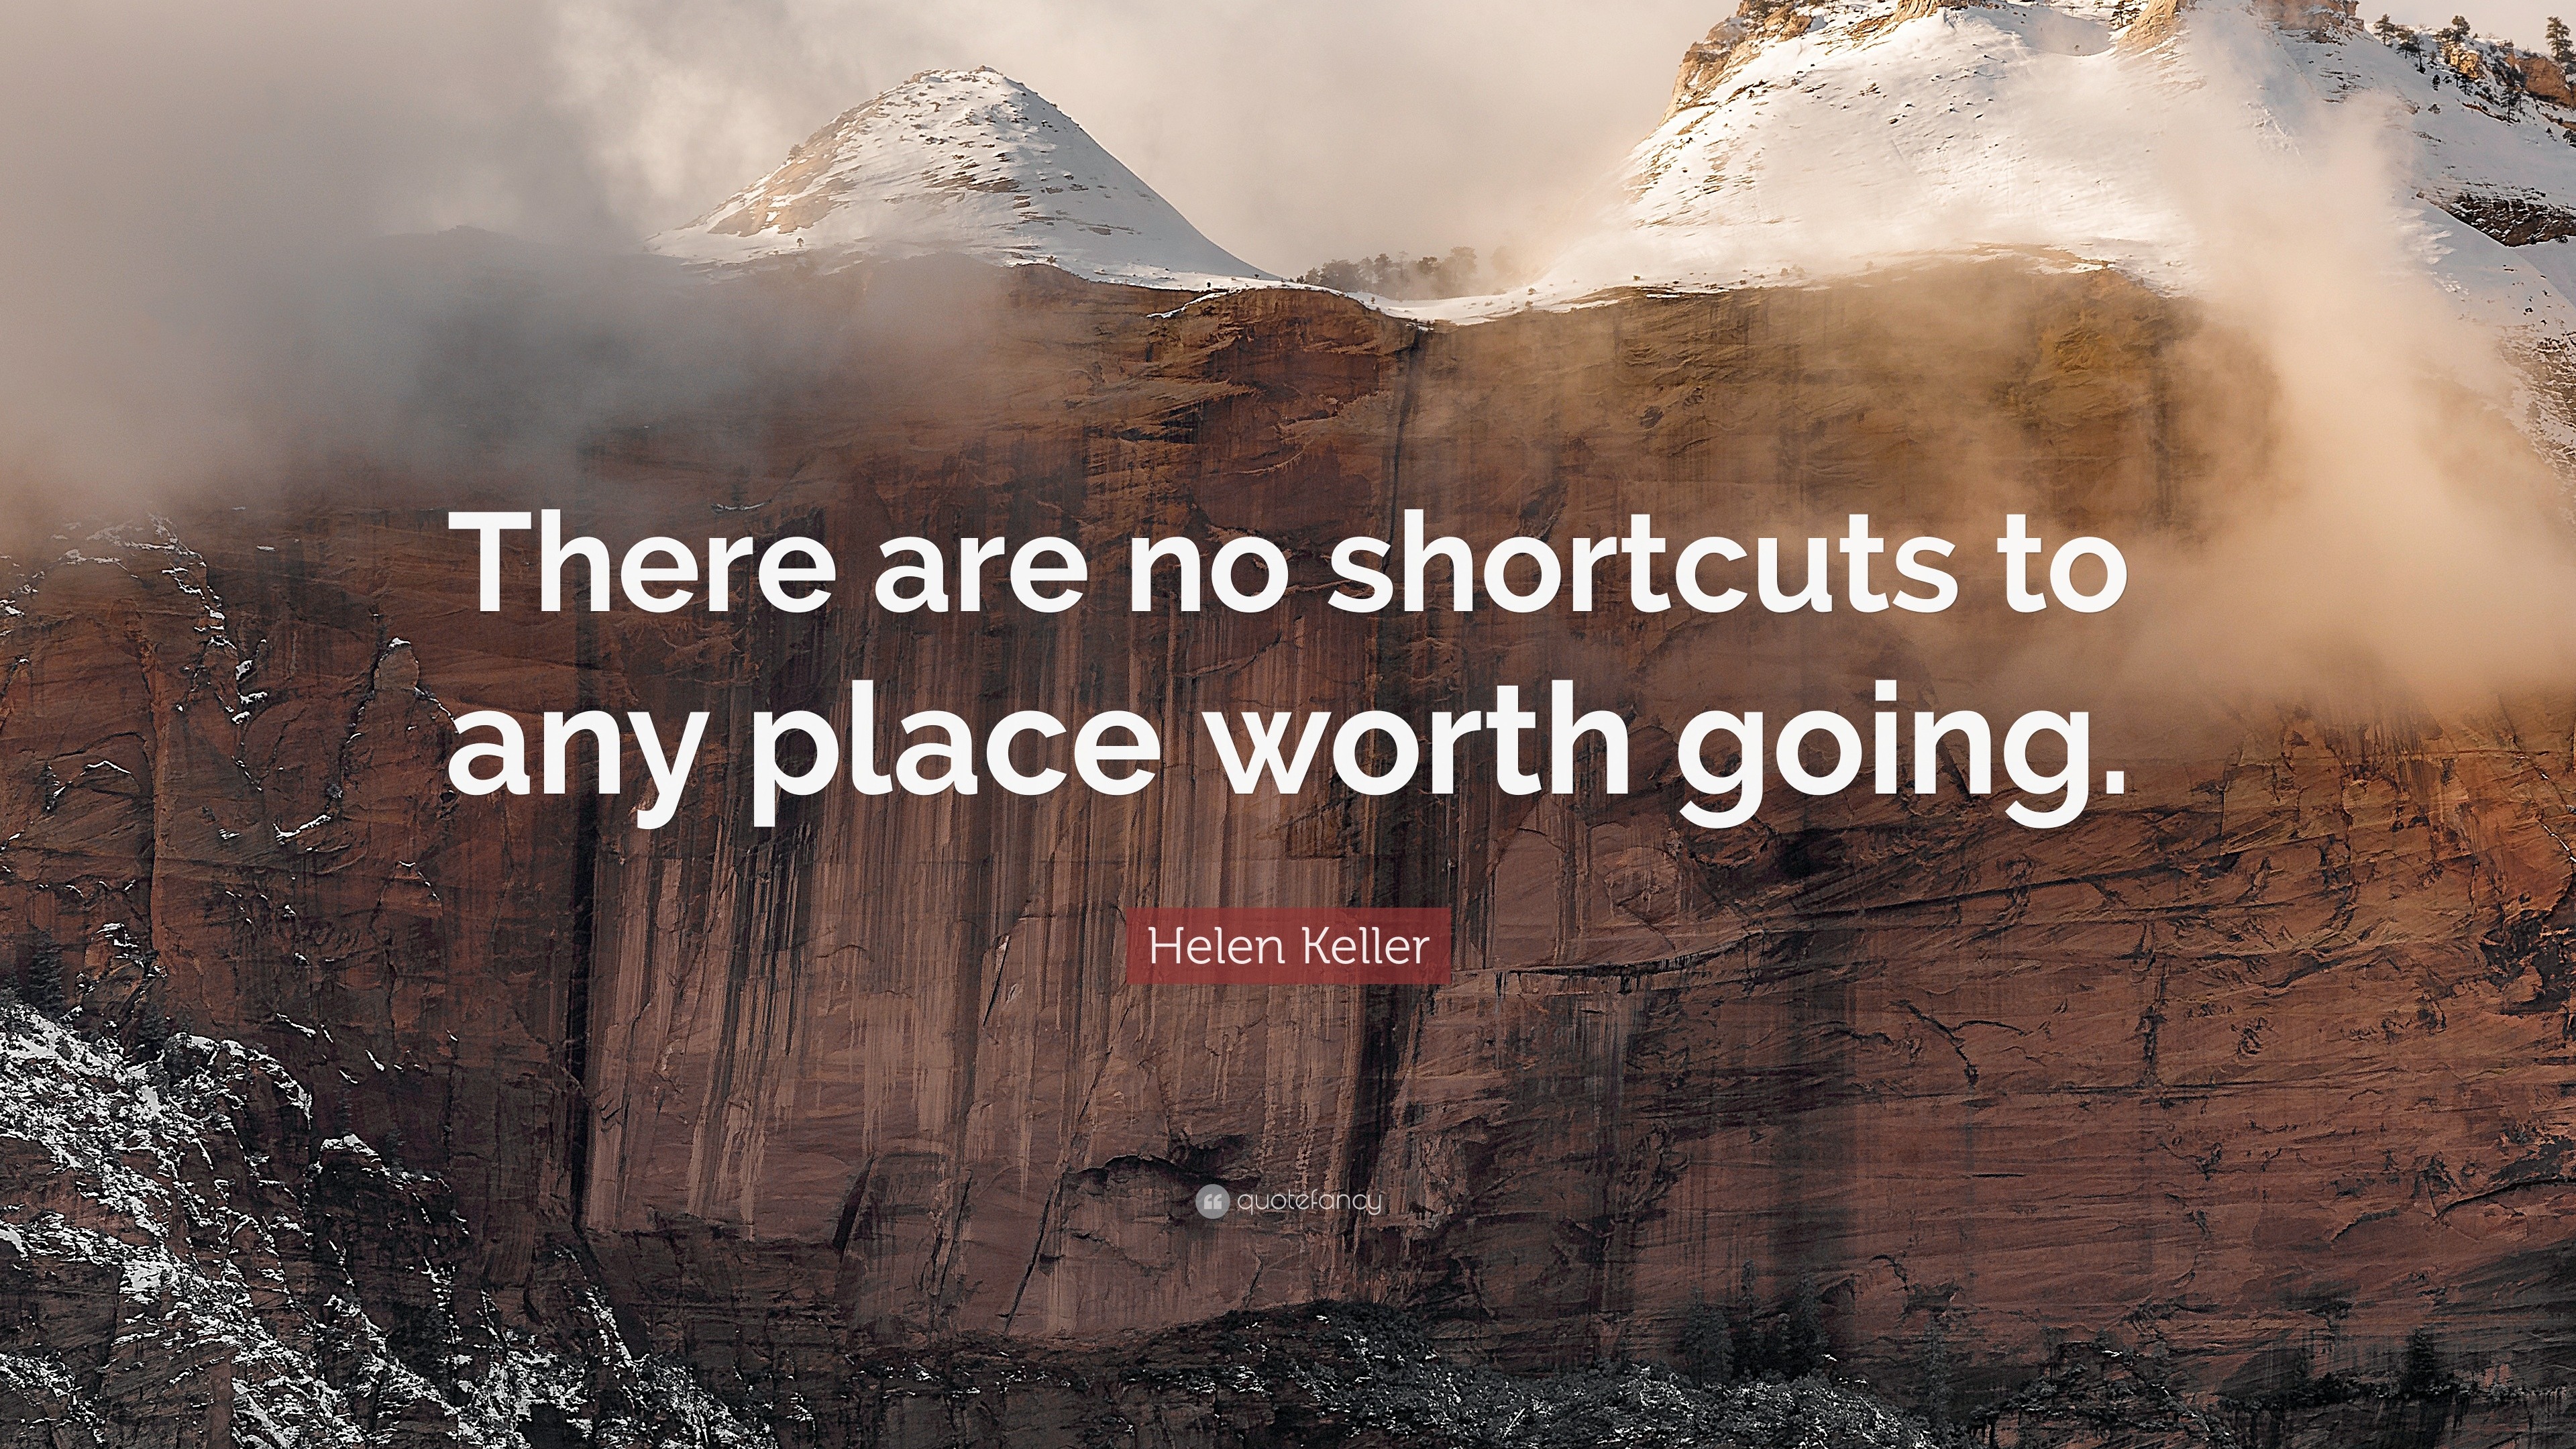 Helen Keller Quote: “There are no shortcuts to any place worth going